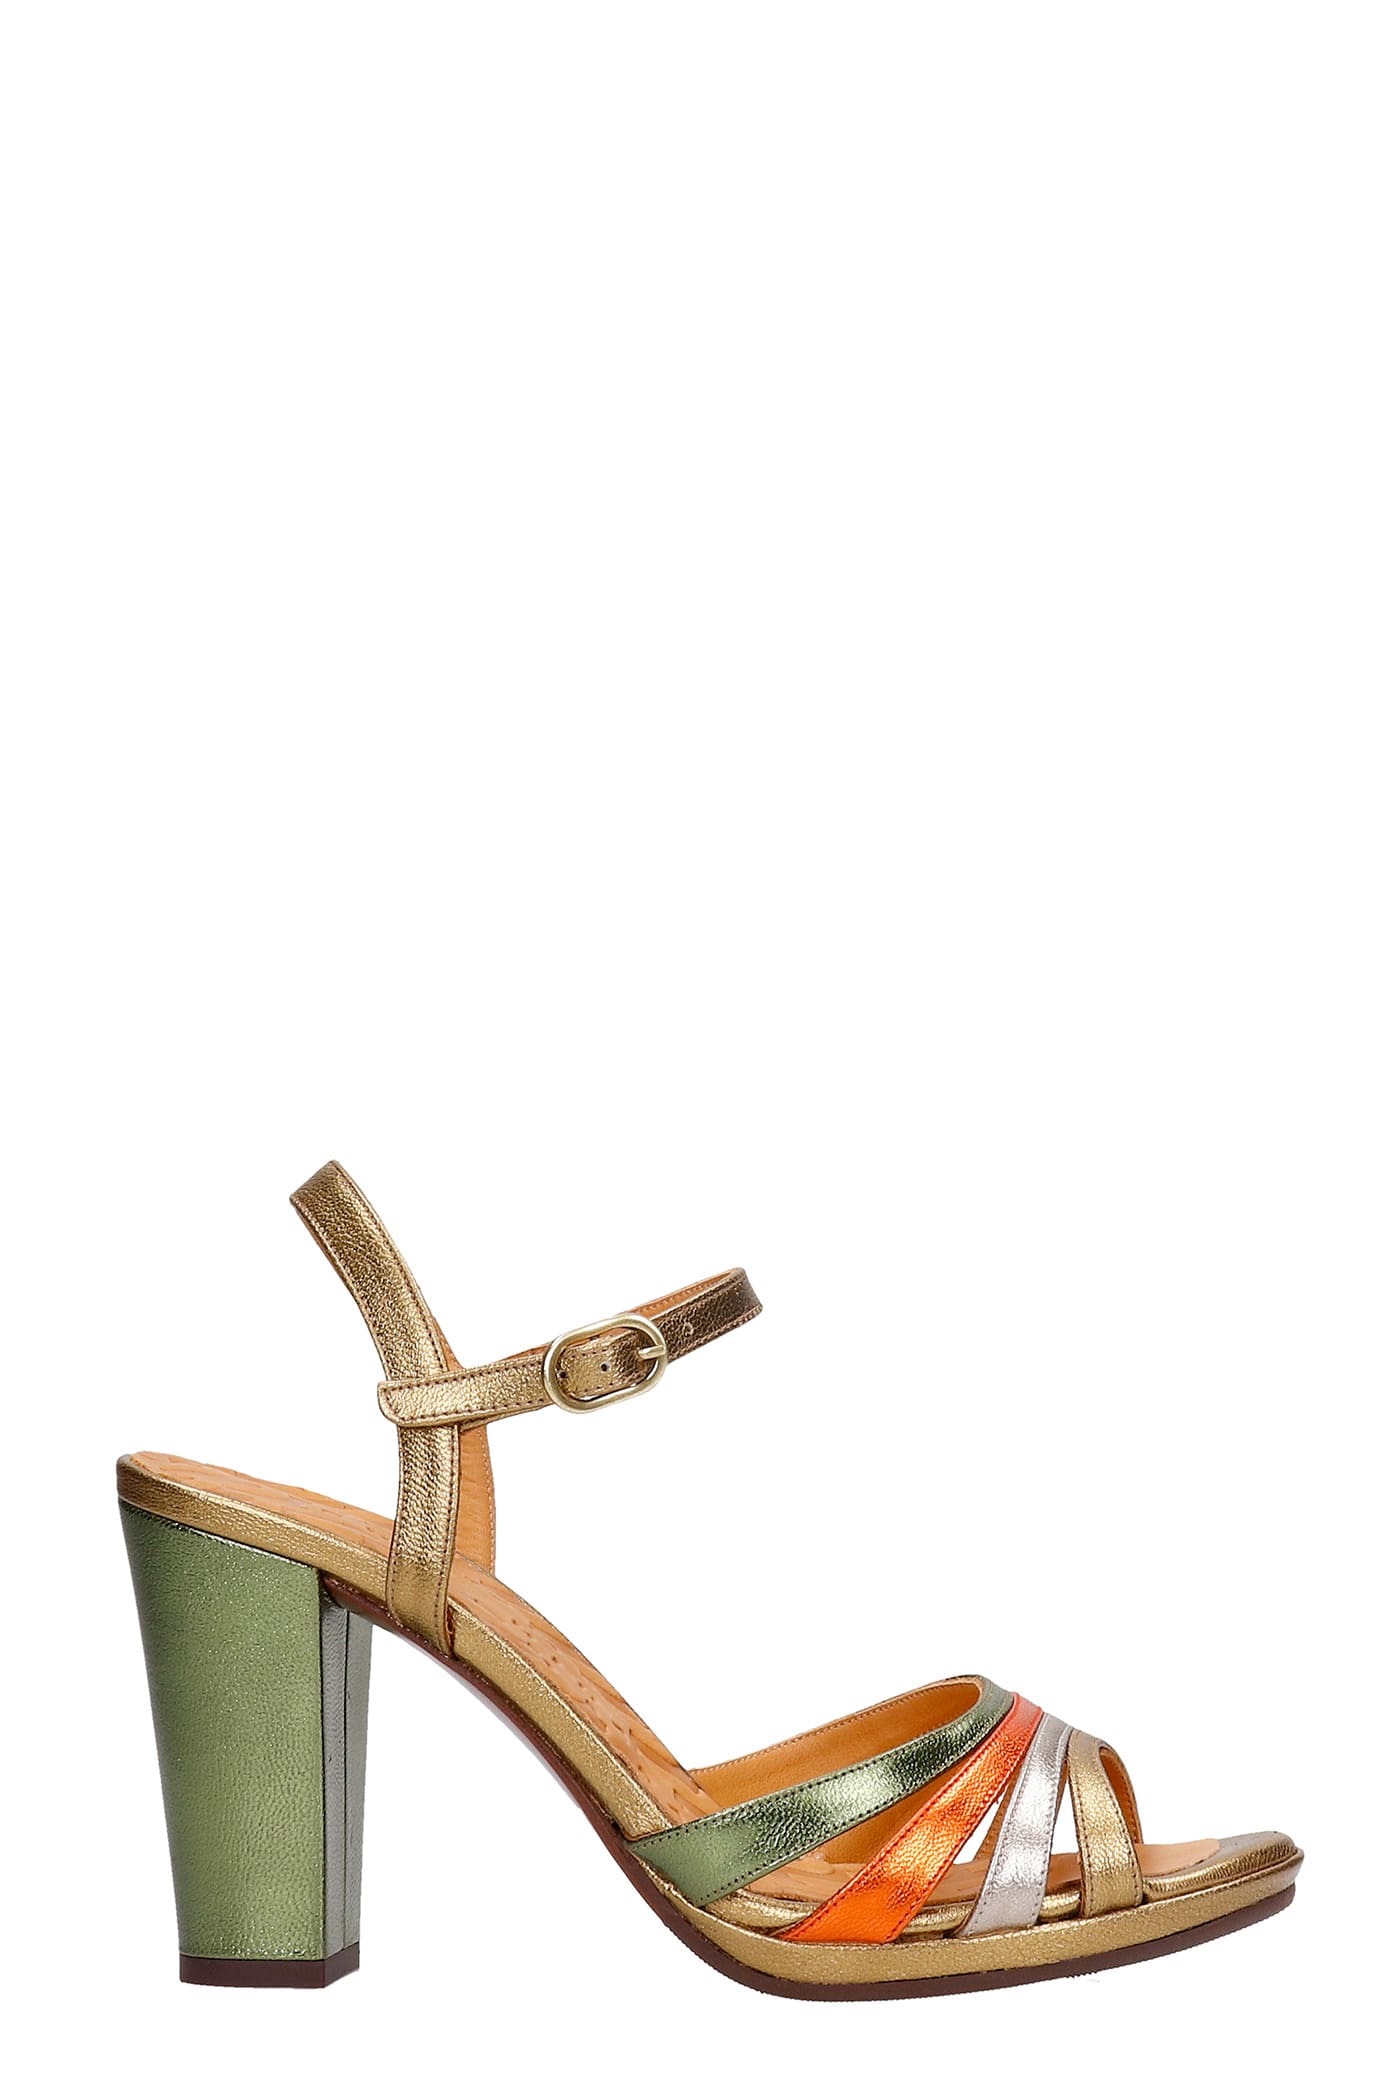 Chie Mihara Adiel Sandals In Bronze Leather